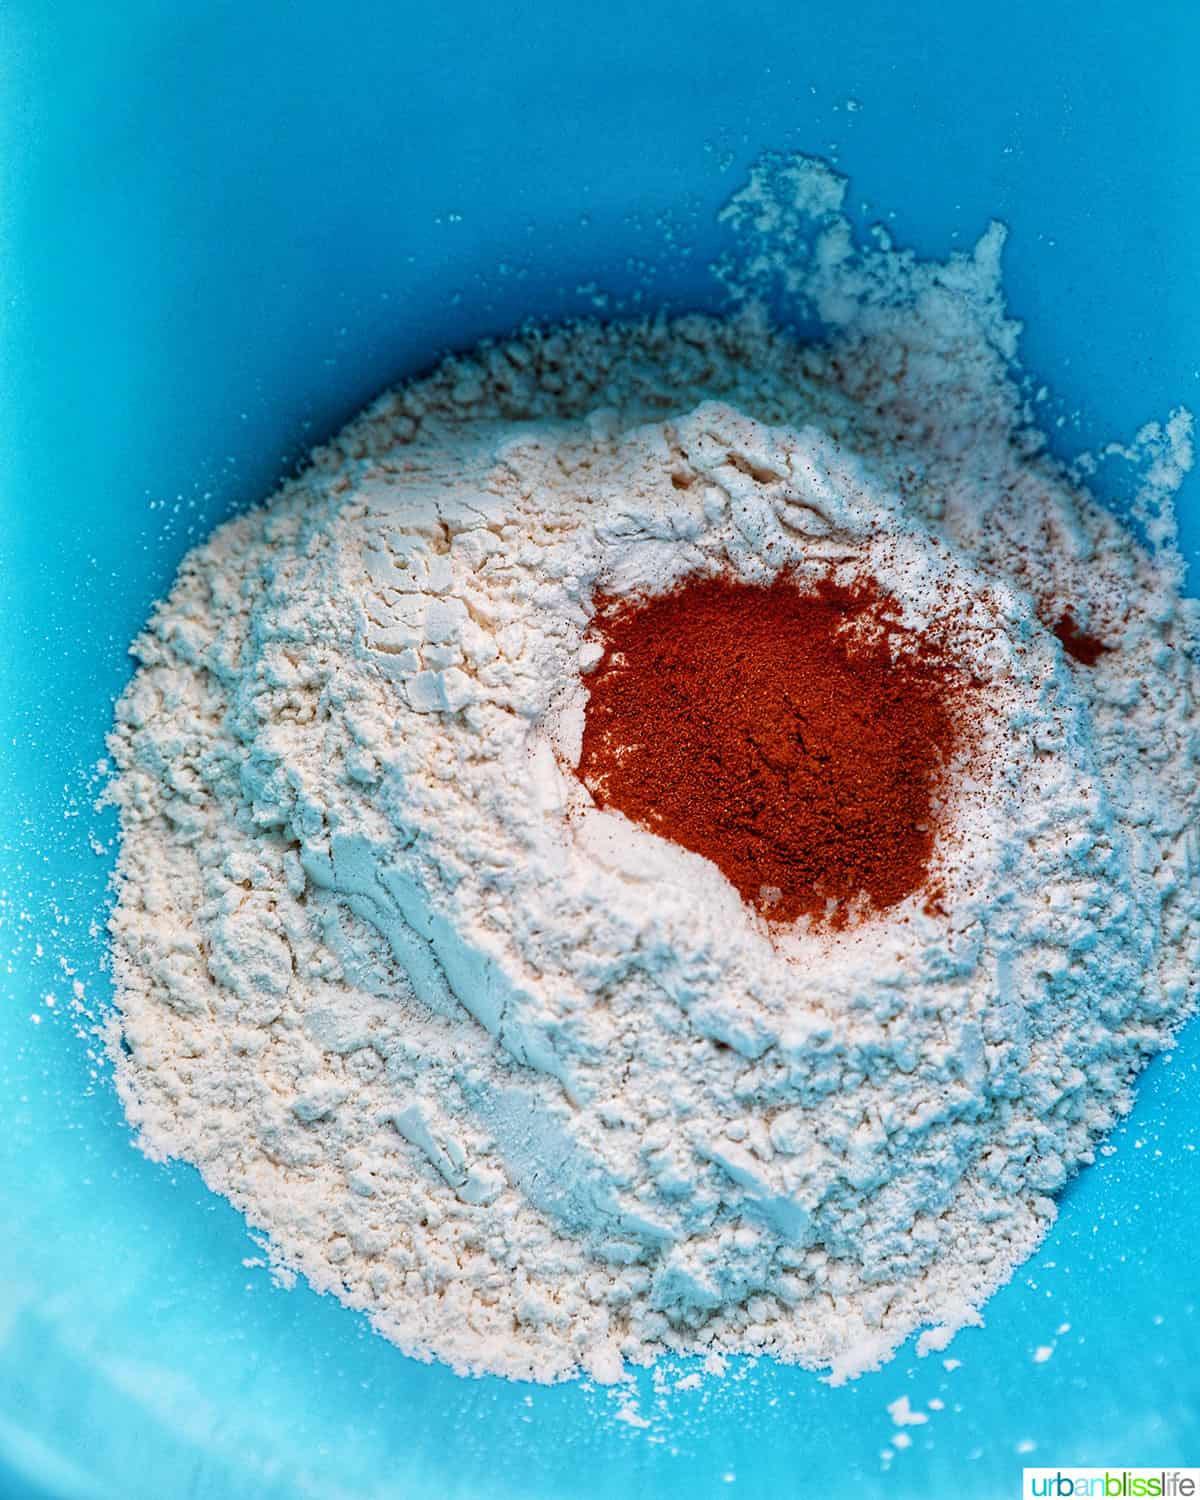 dry ingredients for baked goods.